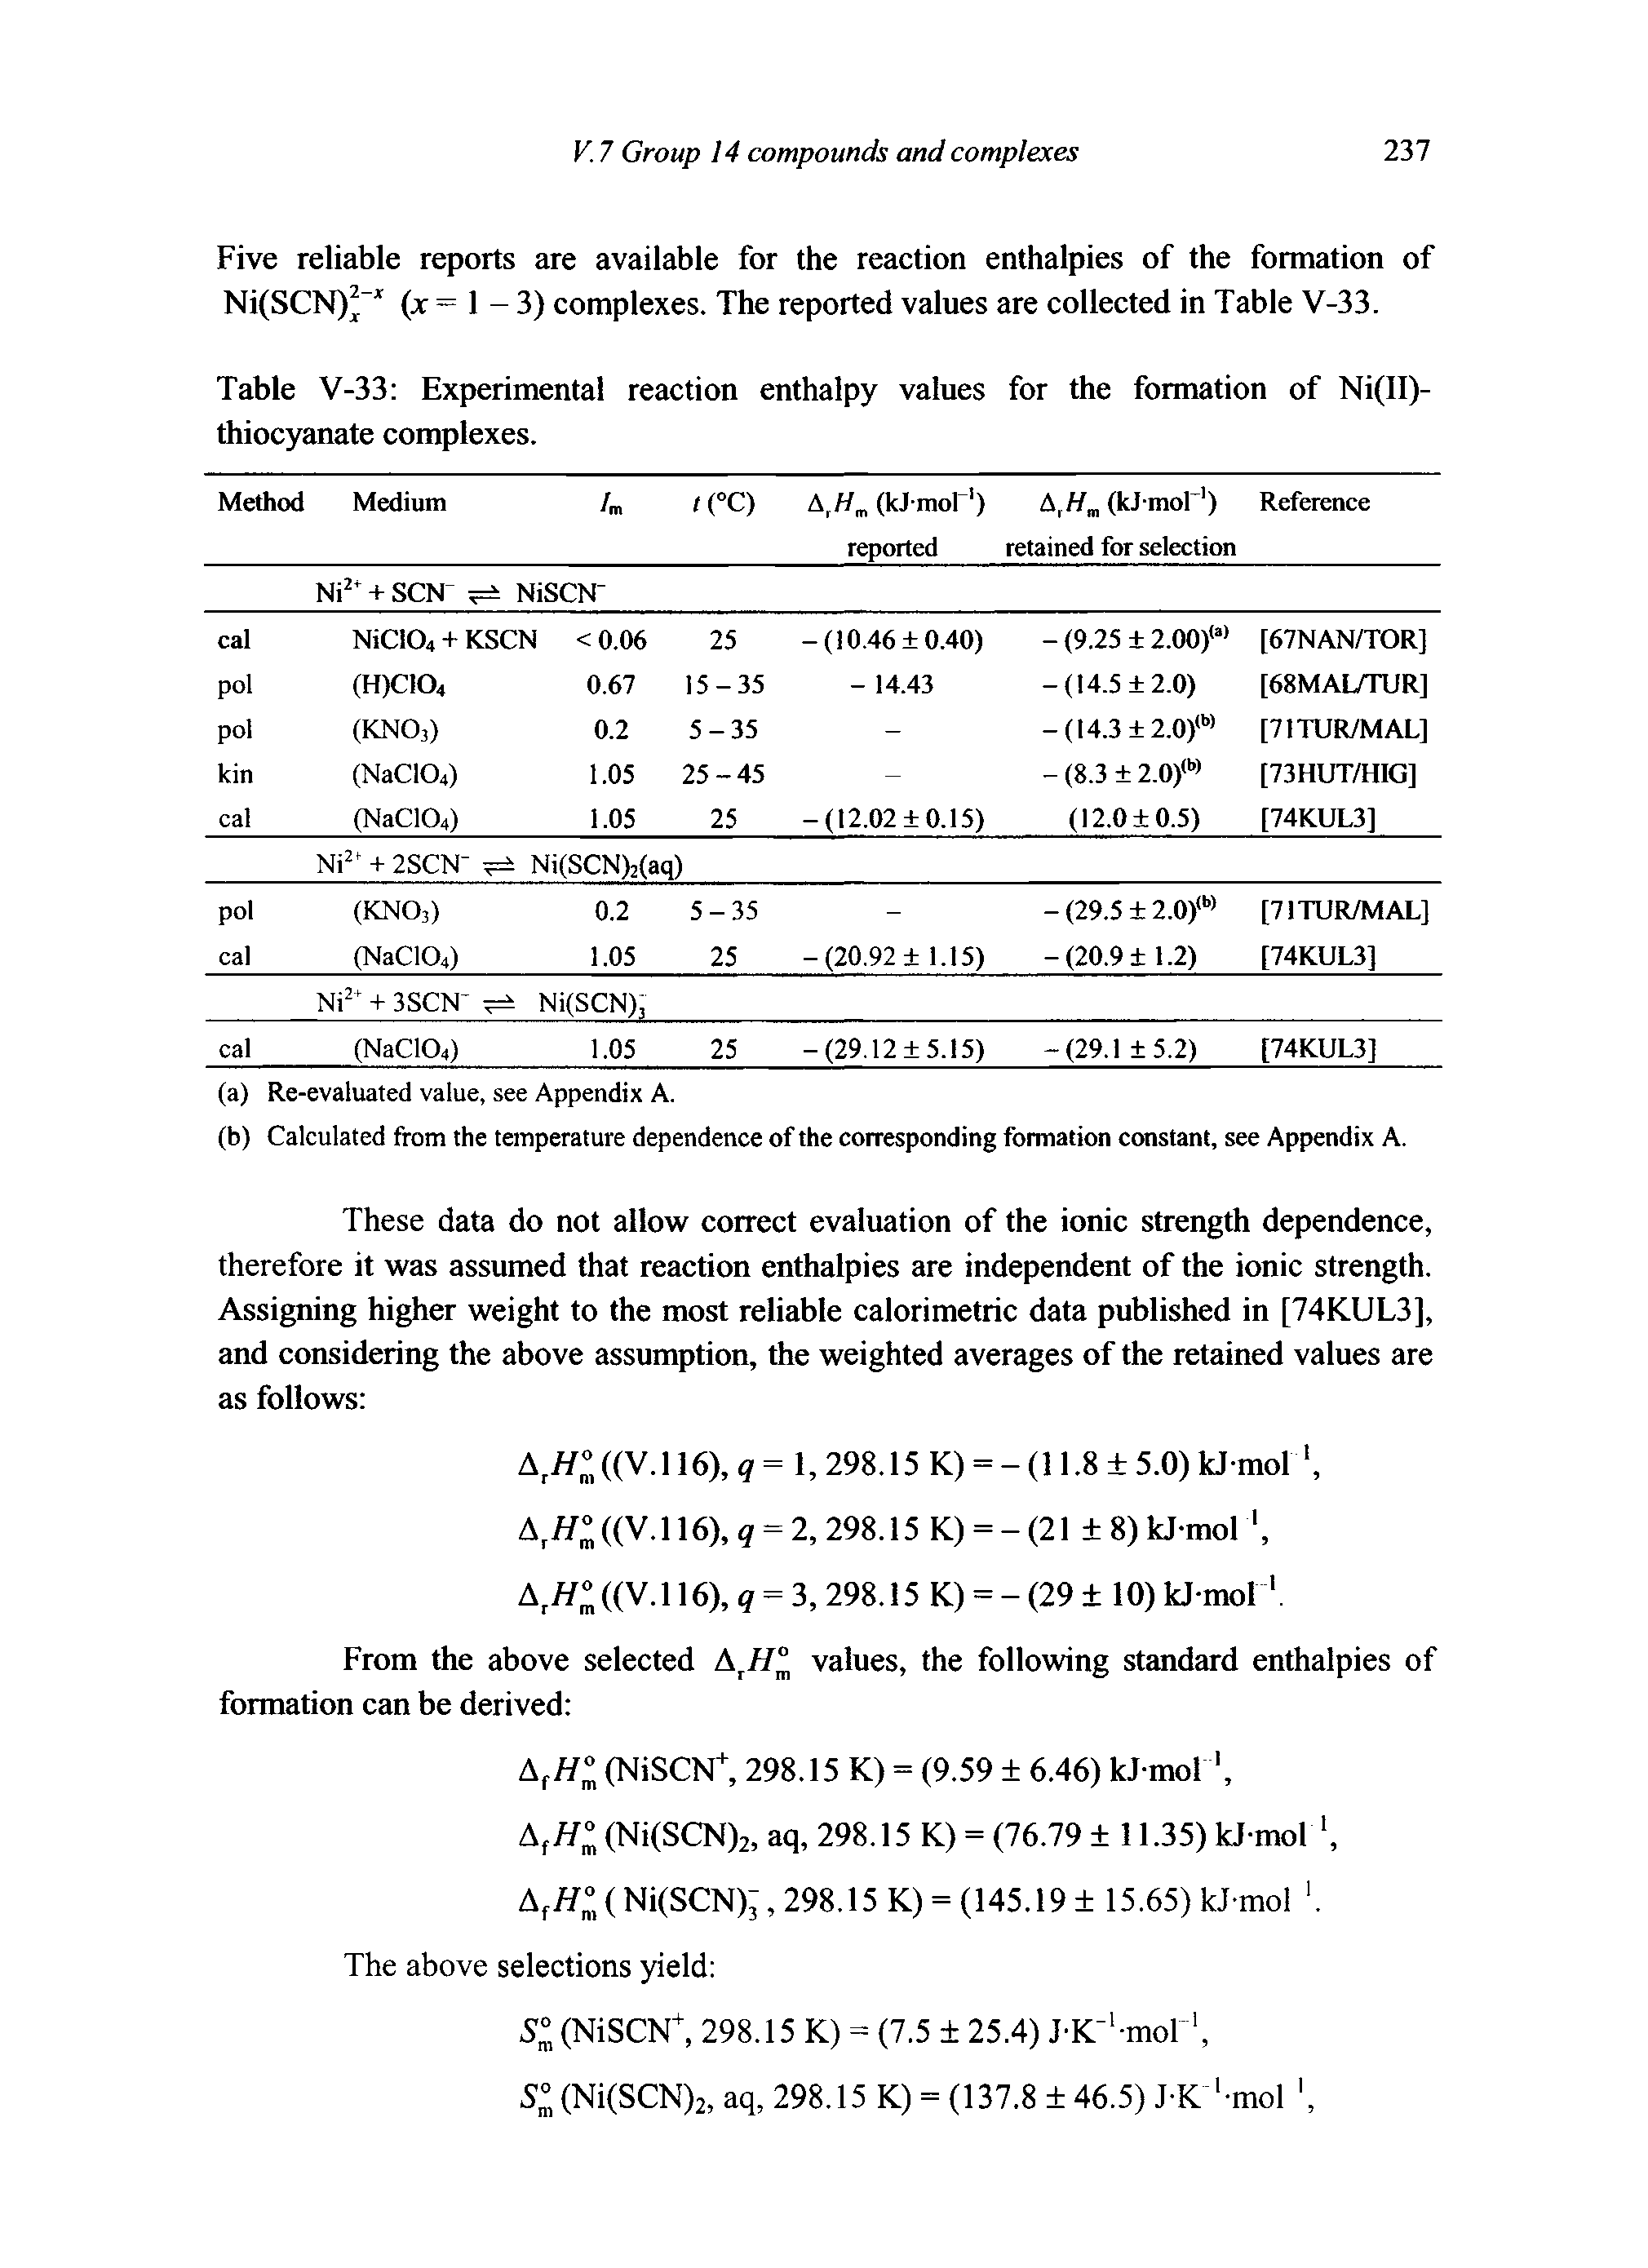 Table V-33 Experimental reaction enthalpy values for the formation of Ni(II)-thiocyanate complexes.